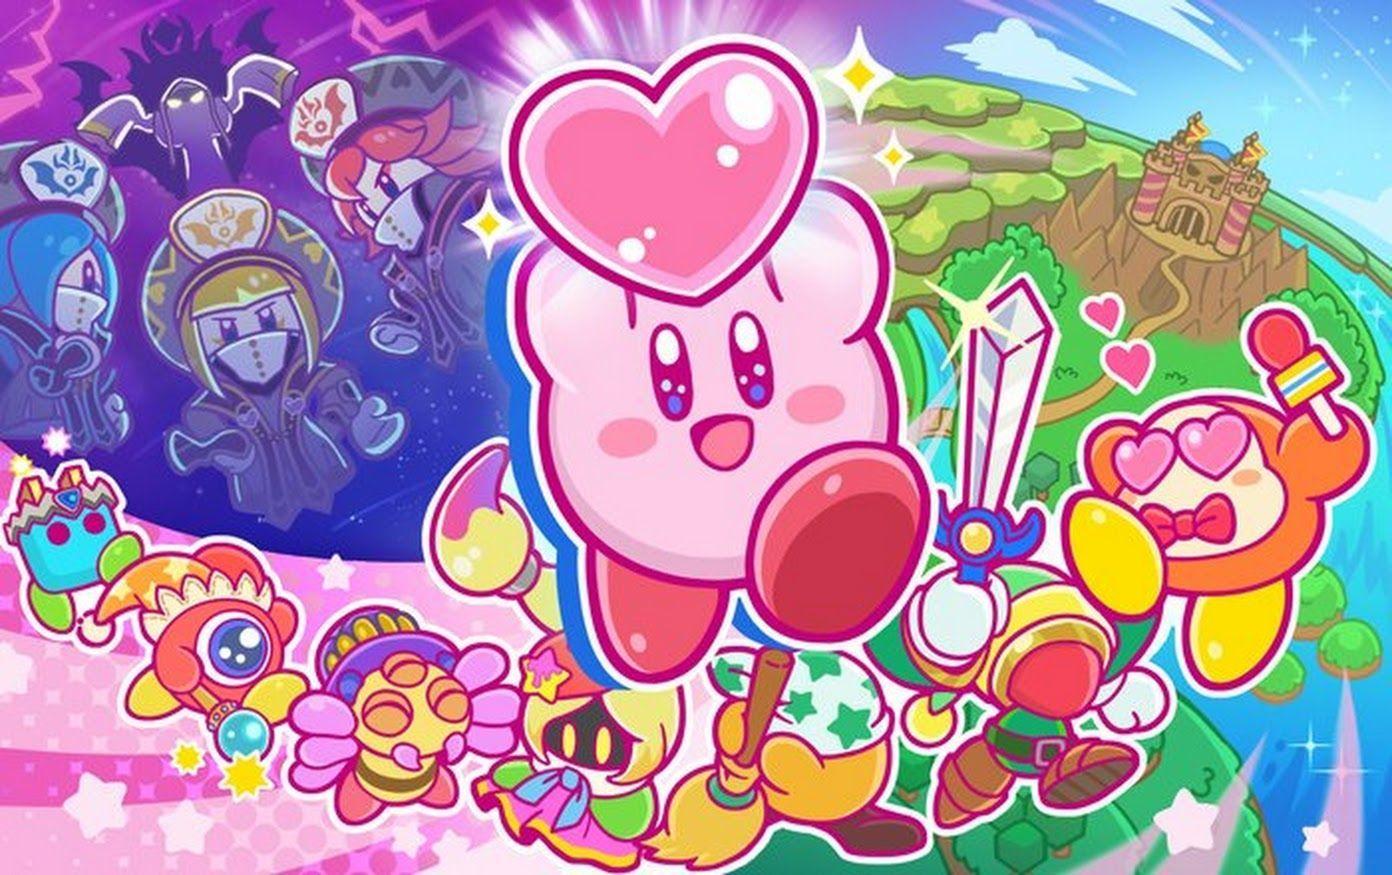 free download kirby all star allies